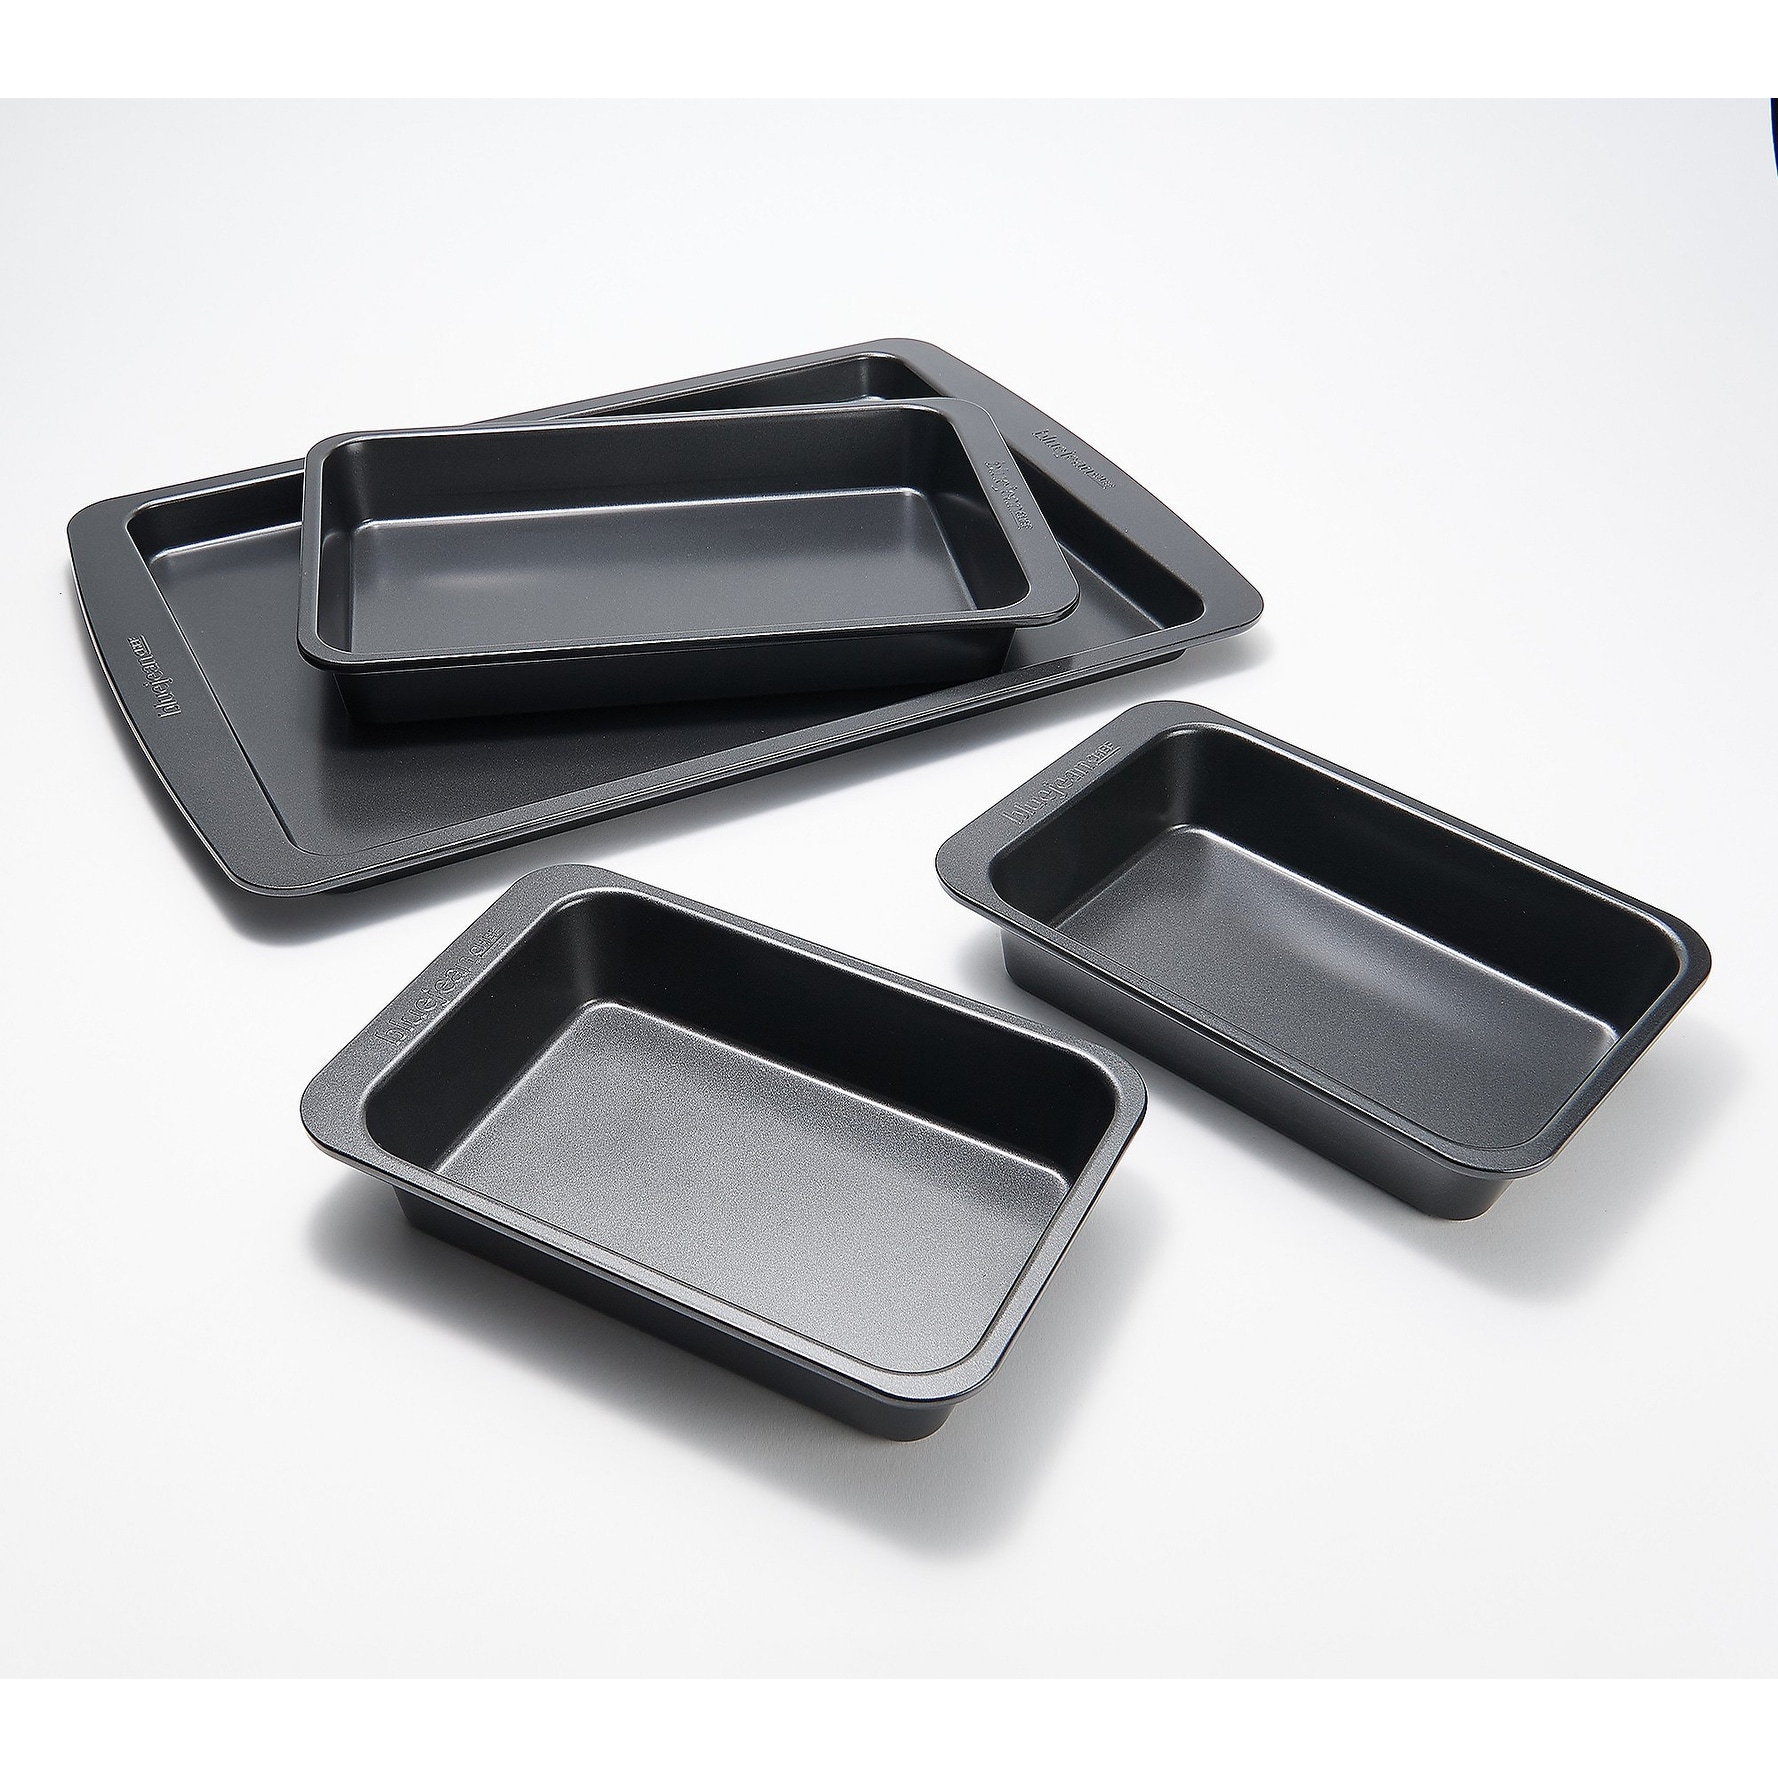 https://ak1.ostkcdn.com/images/products/is/images/direct/74c30e5441a14aeae669a506224fd2f7c33669b3/Blue-Jean-Chef-4-Piece-Sheet-Pan-Dinner-Set-Refurbished.jpg